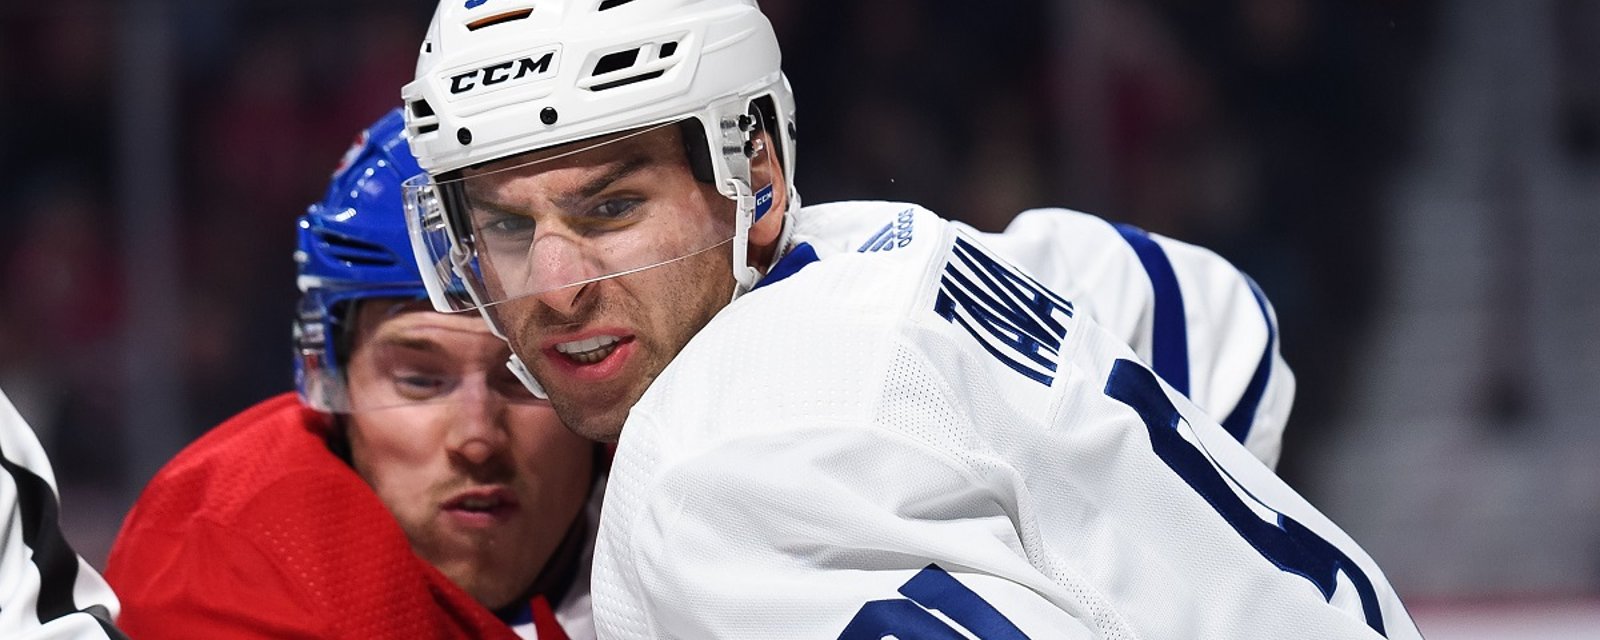 John Tavares confident in the NHL's return to play in spite doubts from his peers.